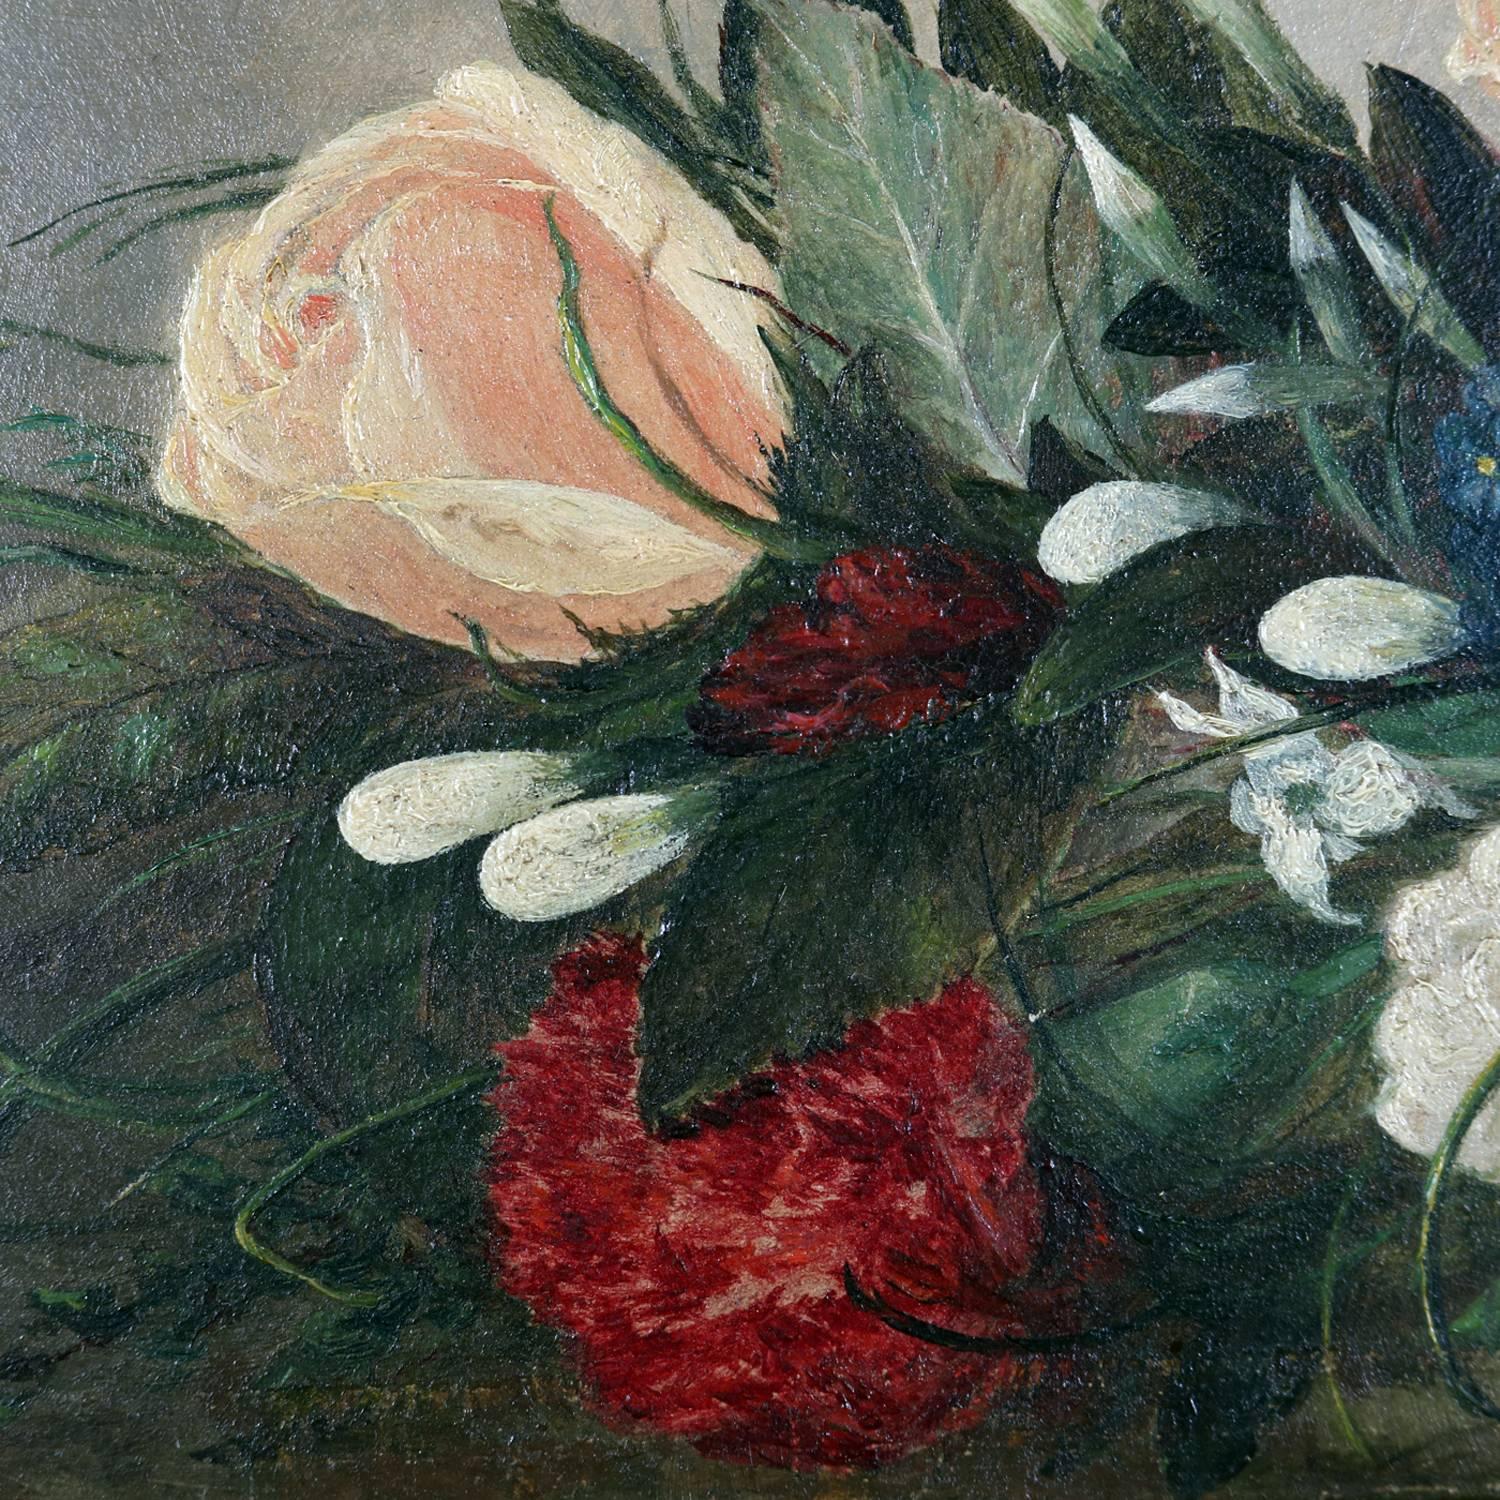 Antique oil on board floral still life painting of garden flowers in European Hand Tie Bouquet with blue ribbon, seated in reeded cove molded frame with fern corners, signed lower right BR, circa 1830

Measures: frame 11